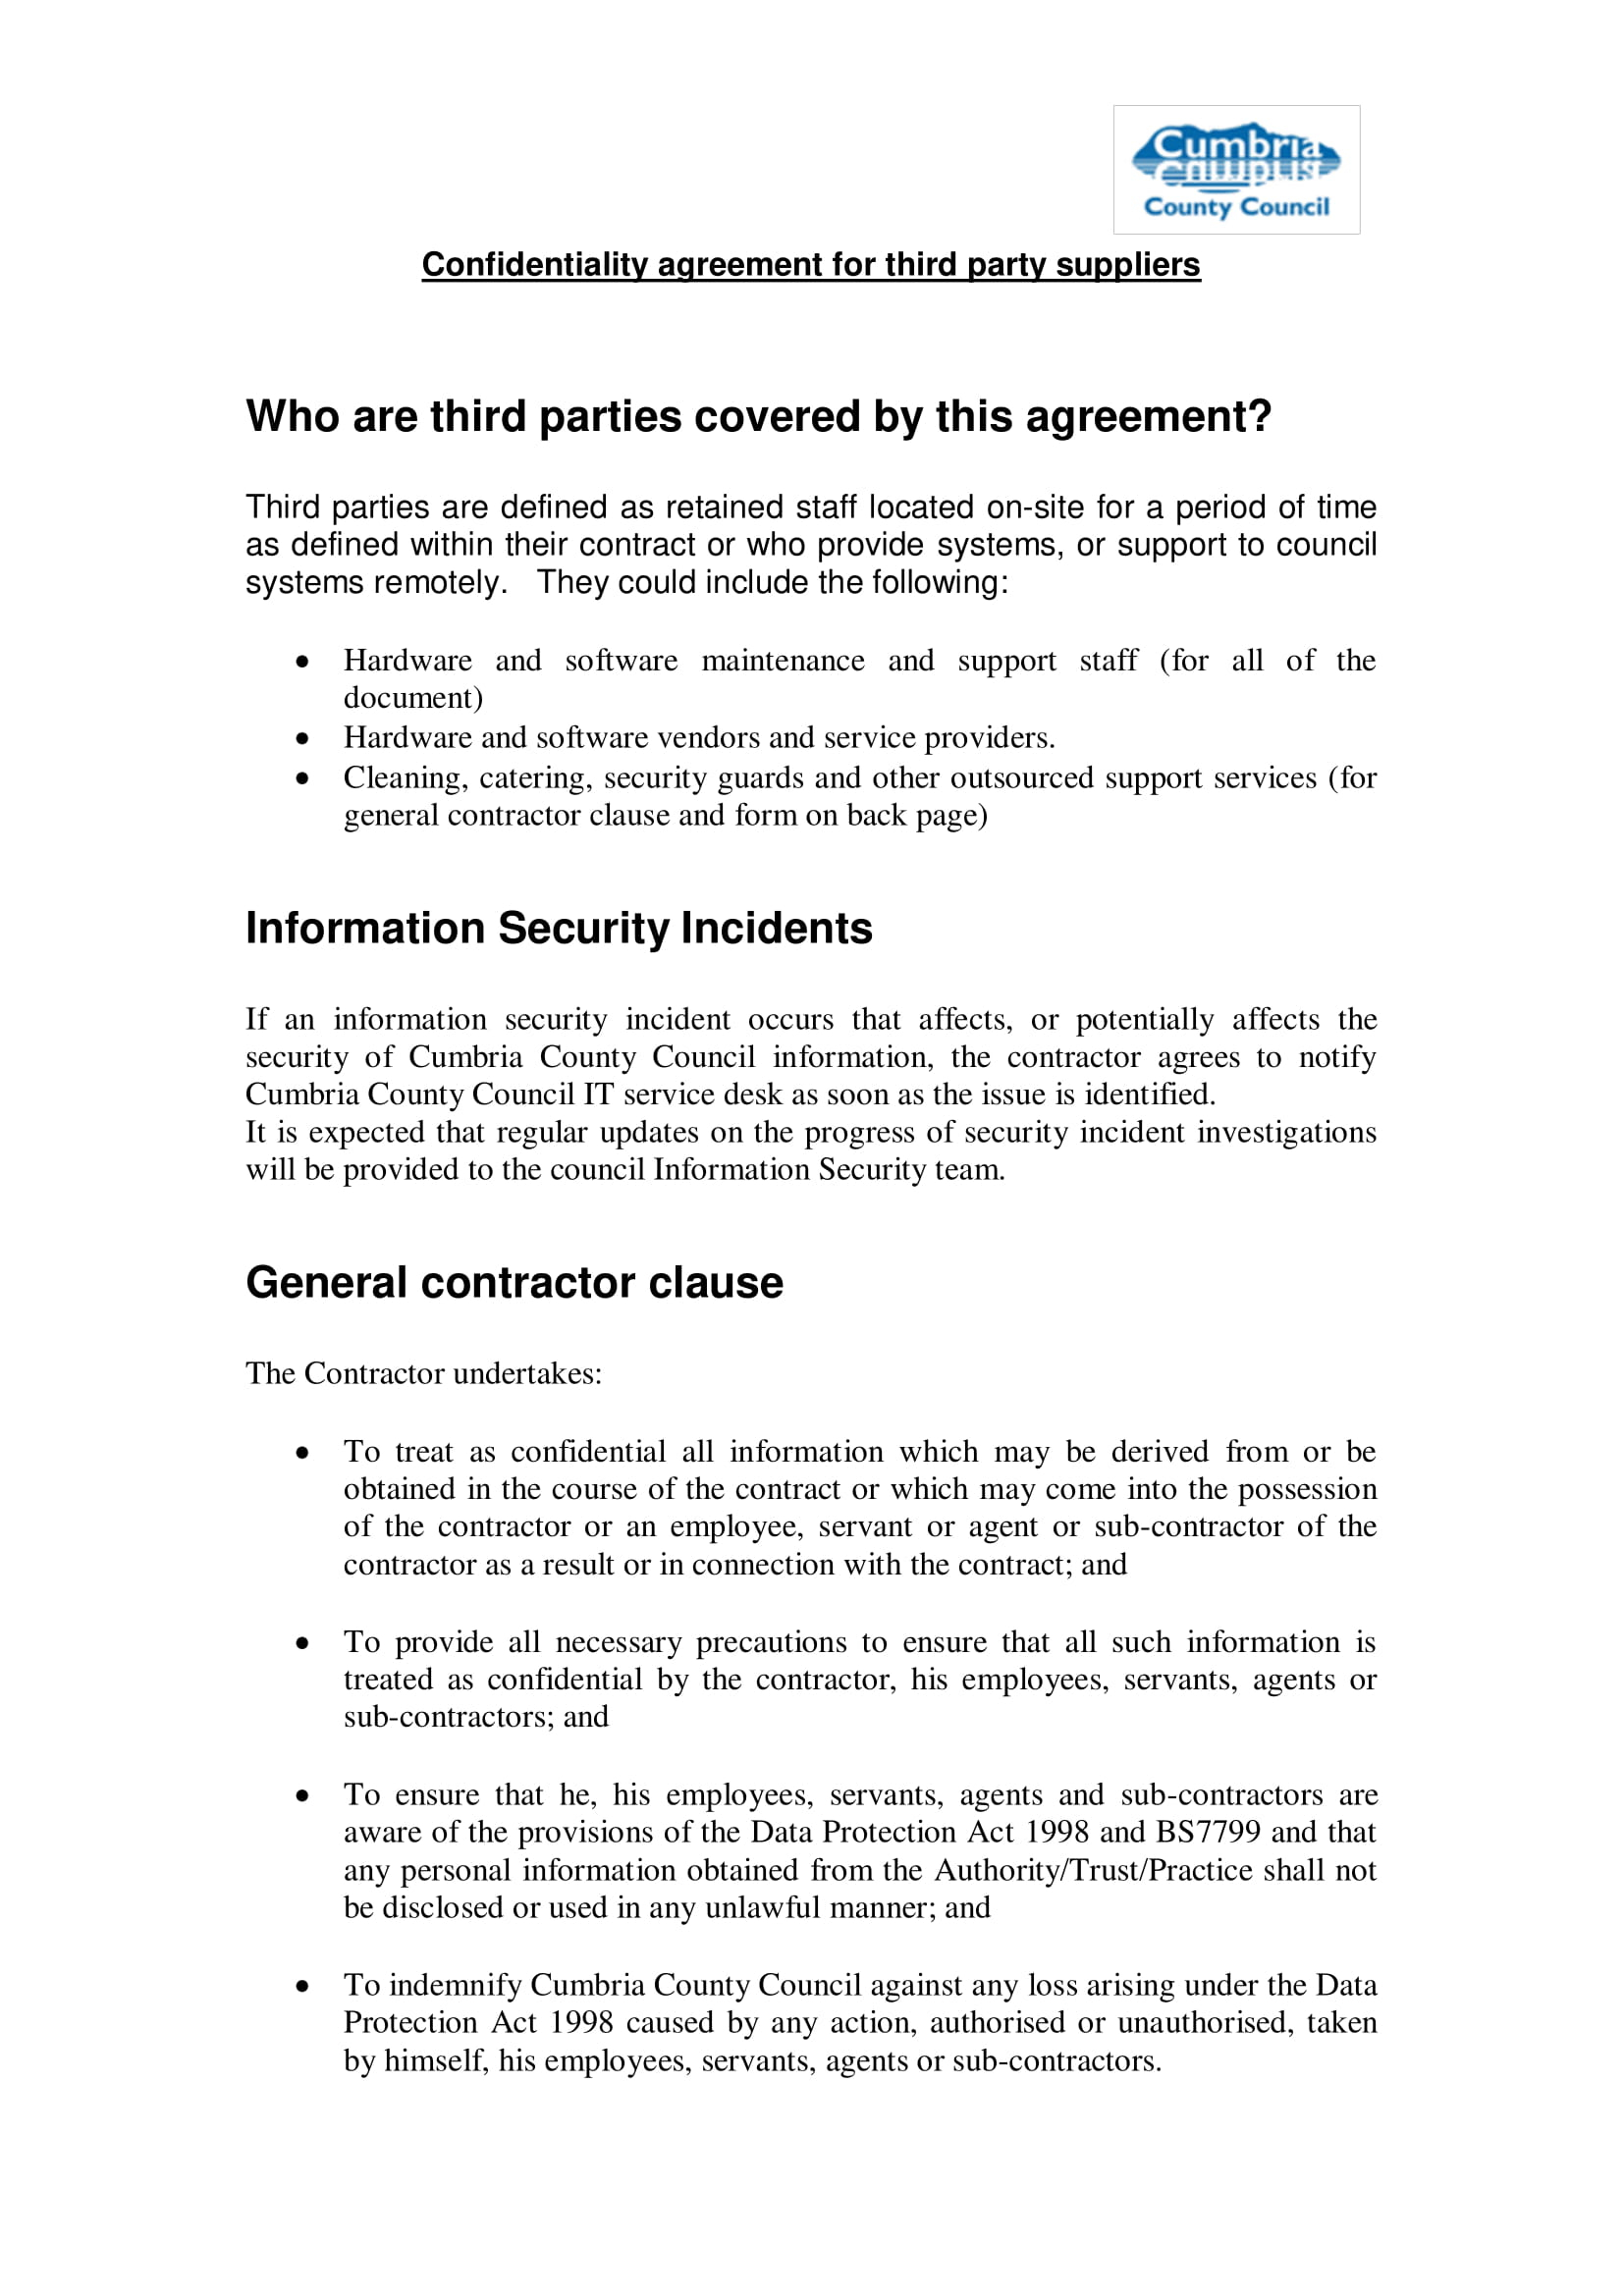 Employee Confidentiality Agreement Form 10 Confidentiality Agreement Contract Forms Pdf